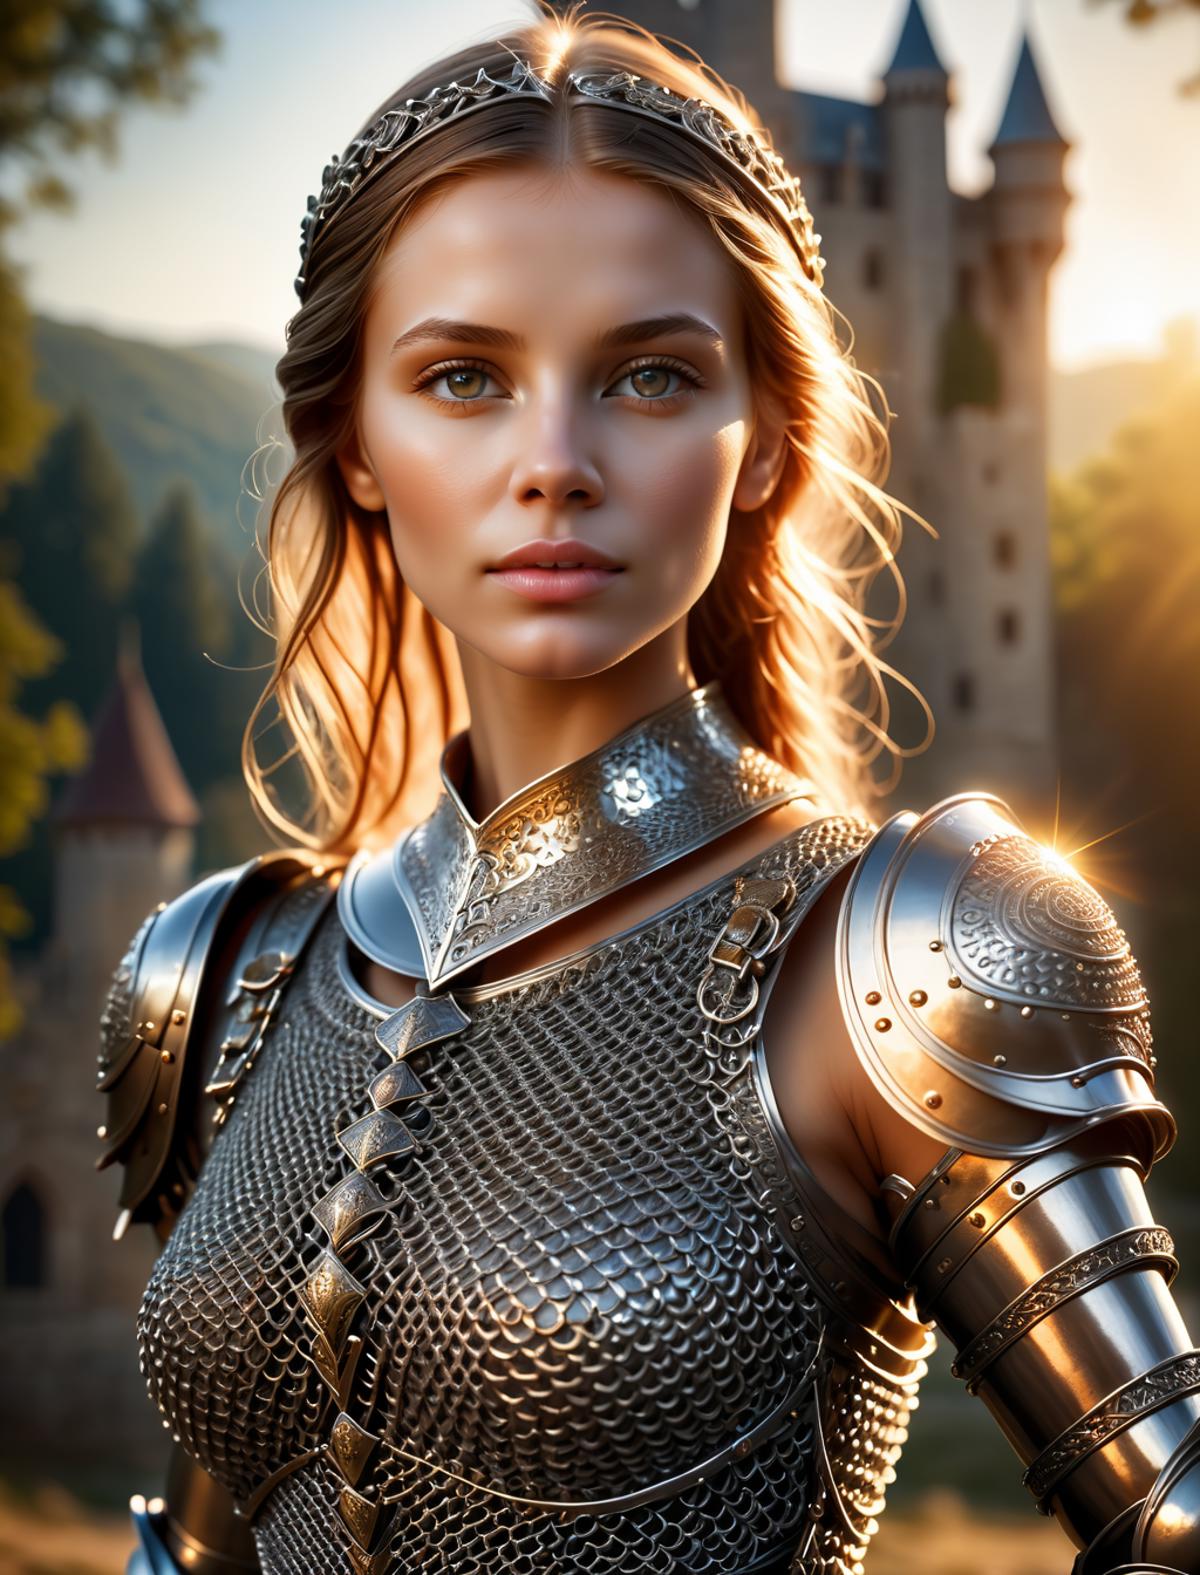 A beautiful woman wearing a chain mail armor, standing in front of a castle.